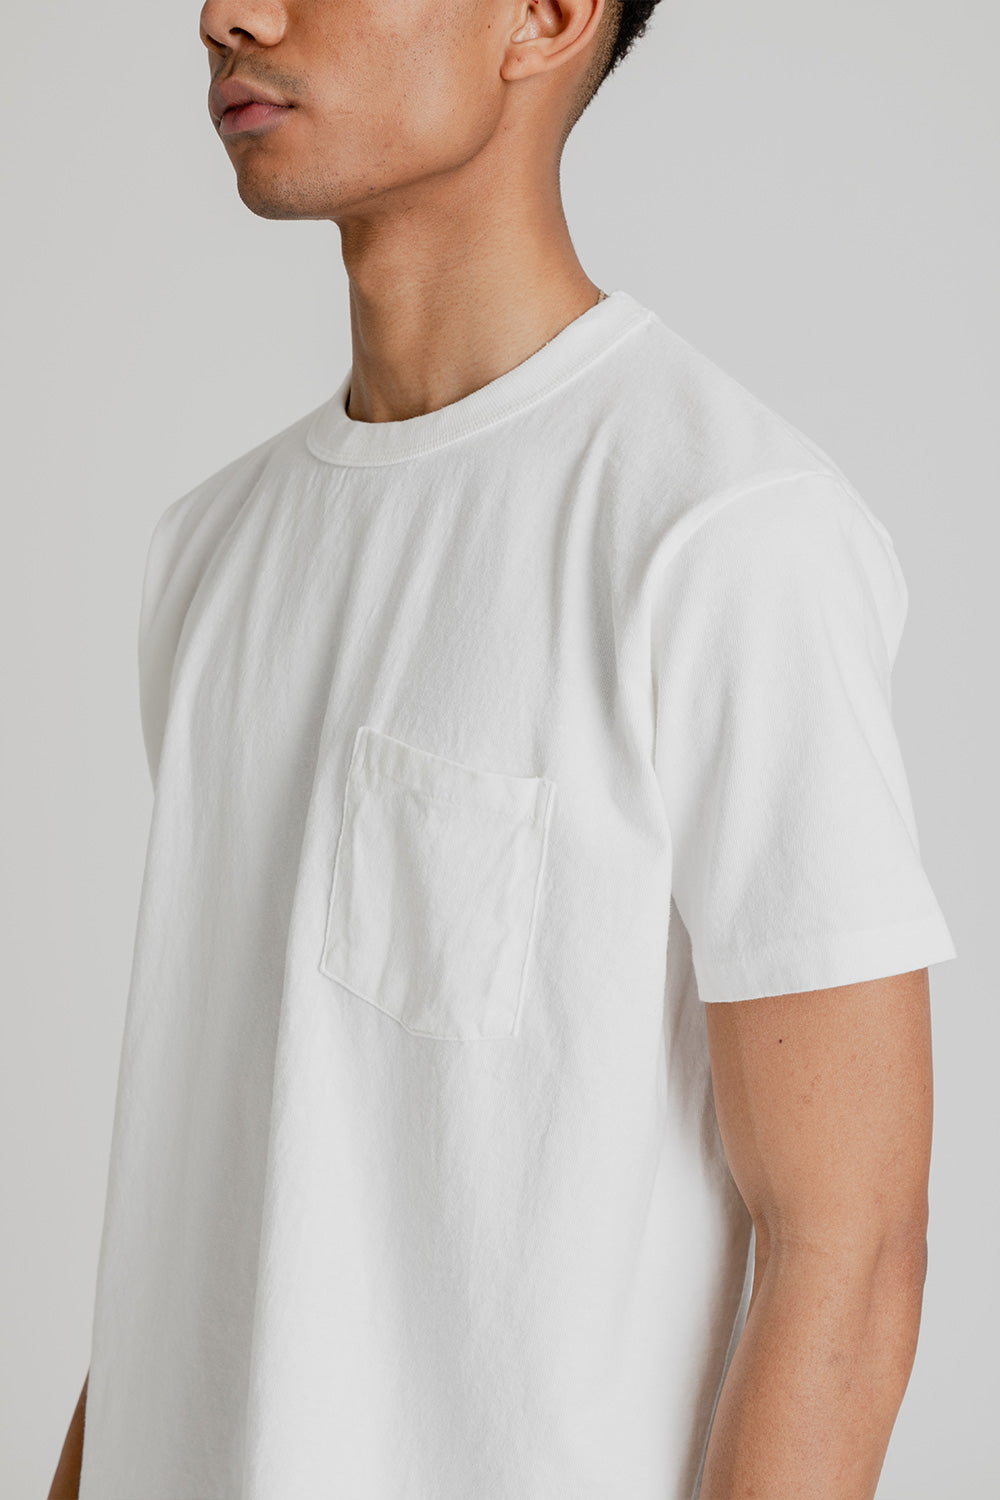 Velva Sheen Pigment Dyed Pocket Tee in Off White | Wallace Mercantile